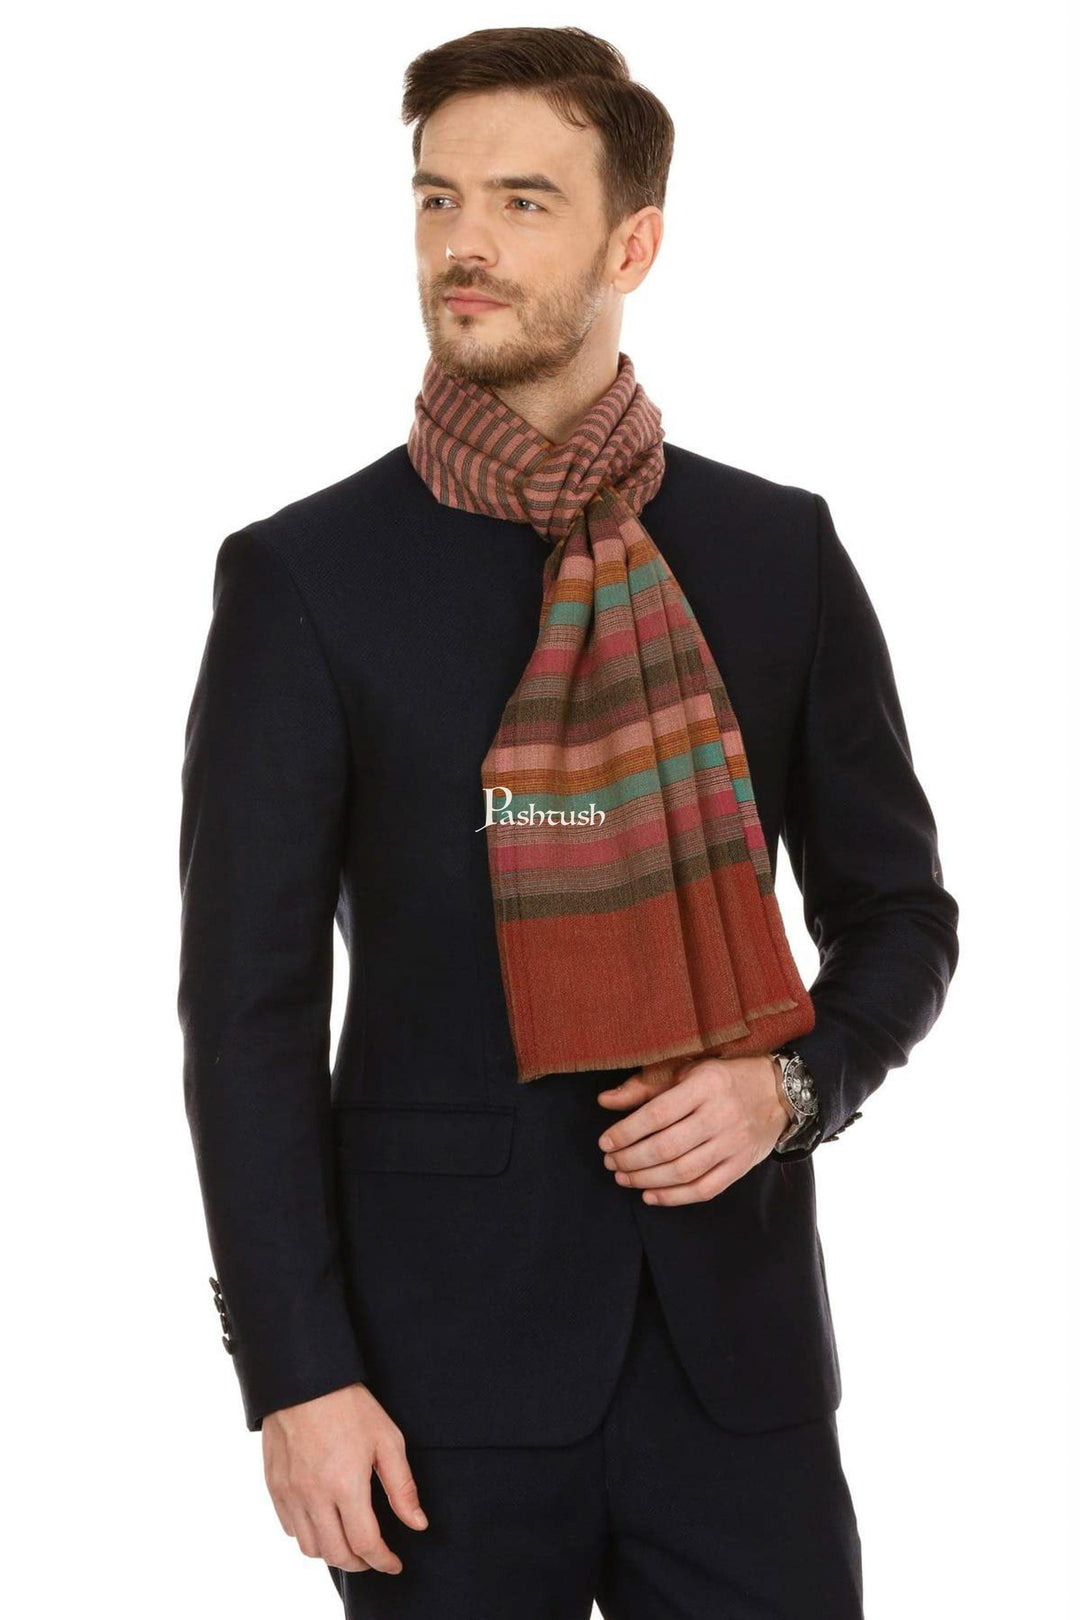 Pashtush India Mens Scarves Stoles and Mufflers Pashtush Mens Fine Wool Striped Muffler, Soft And Warm Stole Scarf